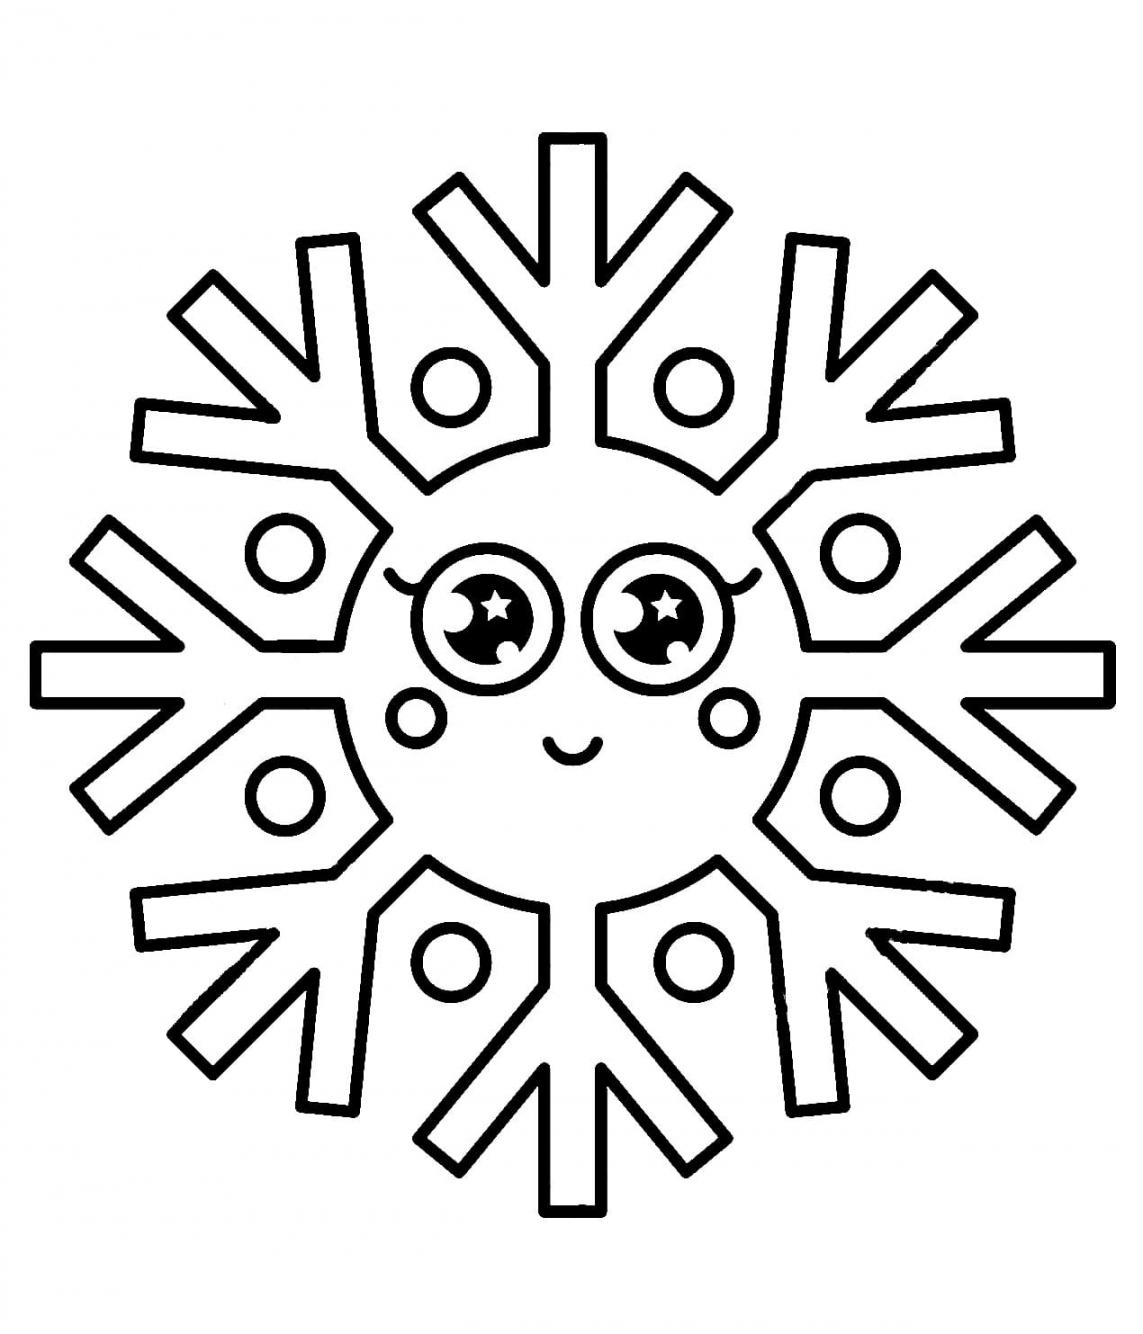 Snowflakes Coloring Pages   Images Print for free - FREE Printables - Snowflakes To Print